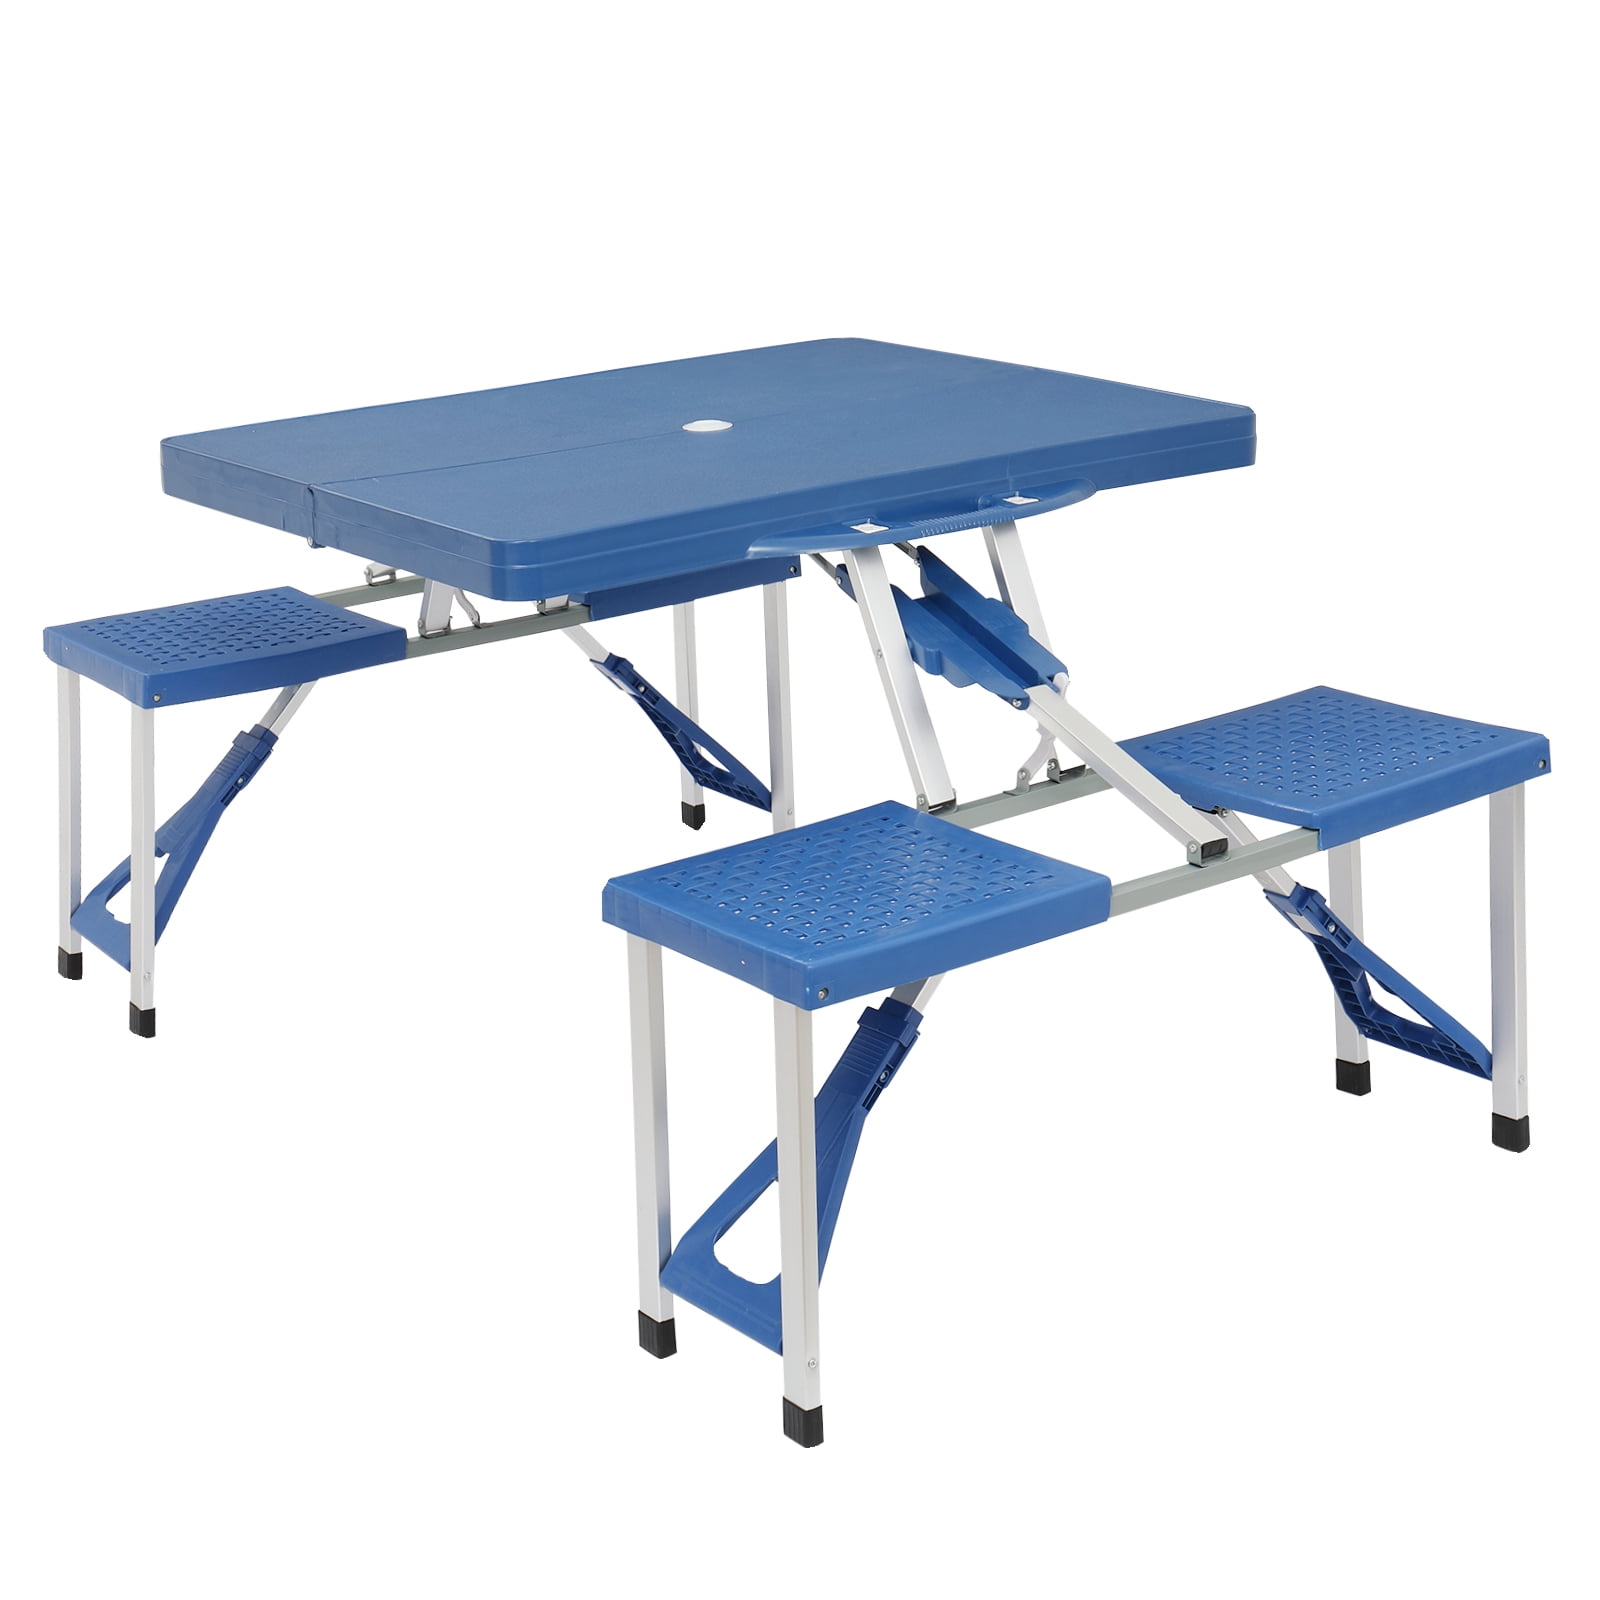 Durable Aluminium Outdoor Foldable Carry Camping Beach Picnic Table Chairs Set 